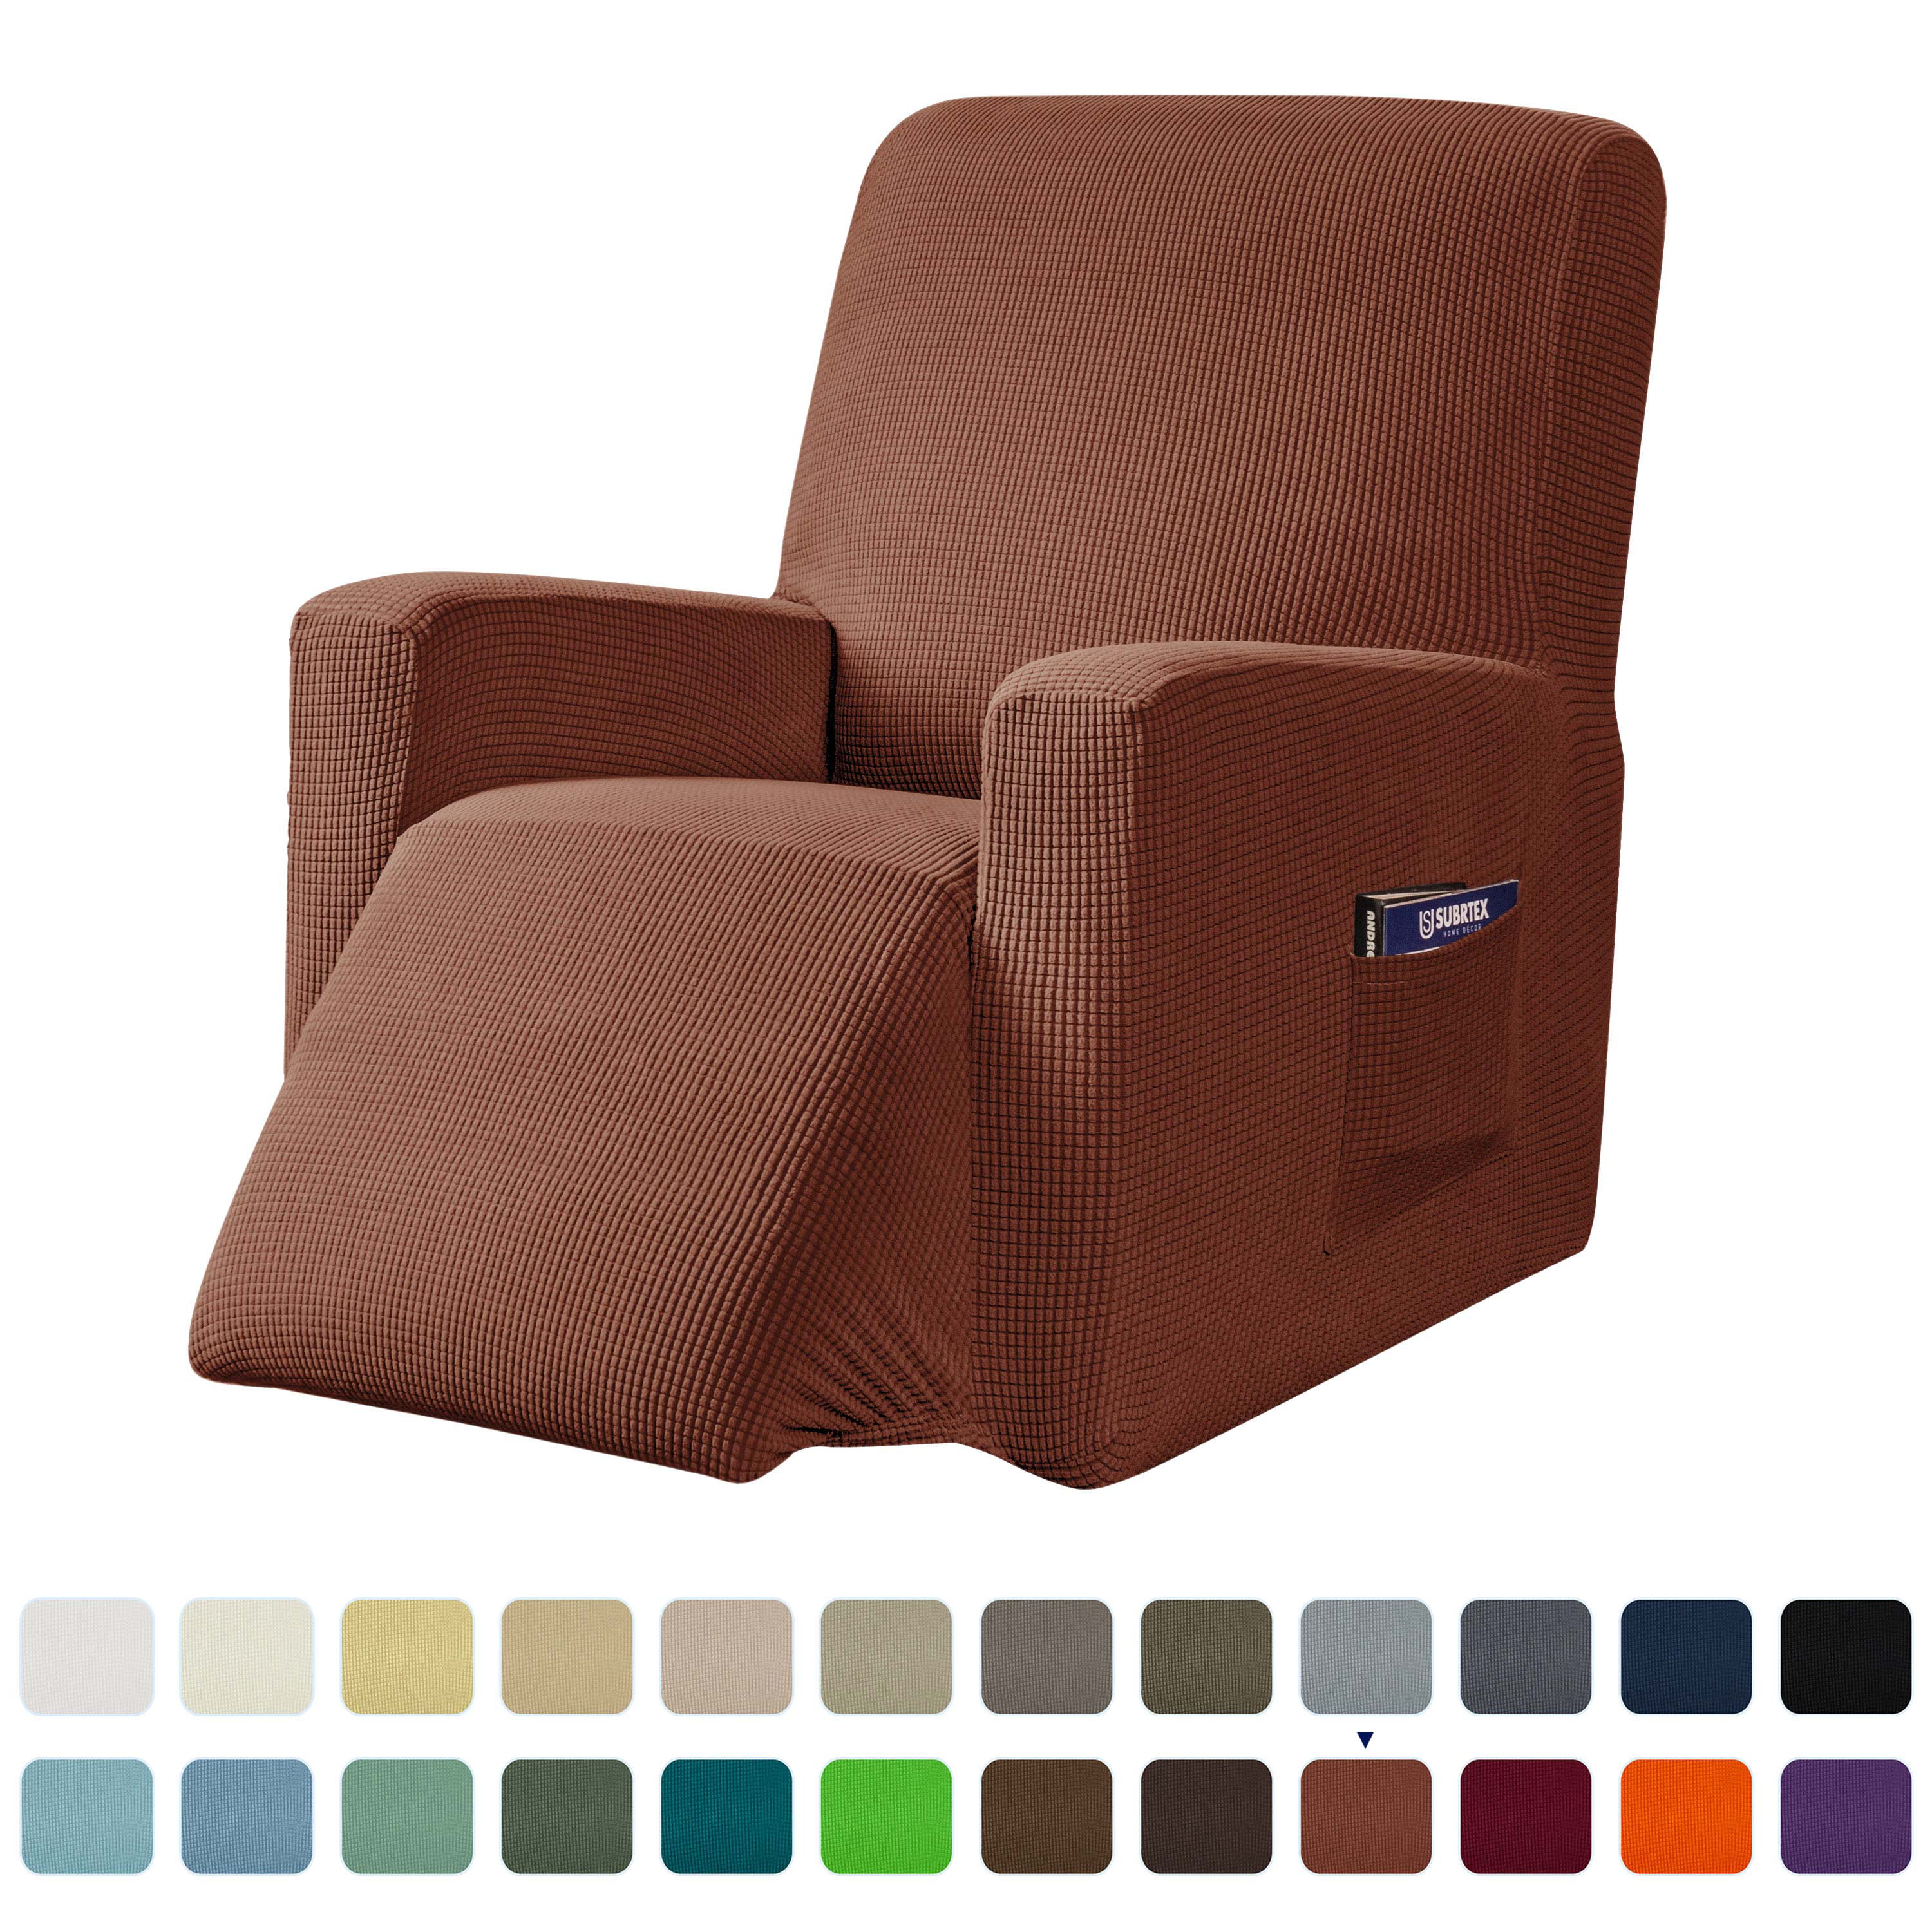 RED RECLINER COVER-ALSO COMES IN SOFA COUCH LOVESEAT CHAIR AND FUTON SLIPCOVERS 